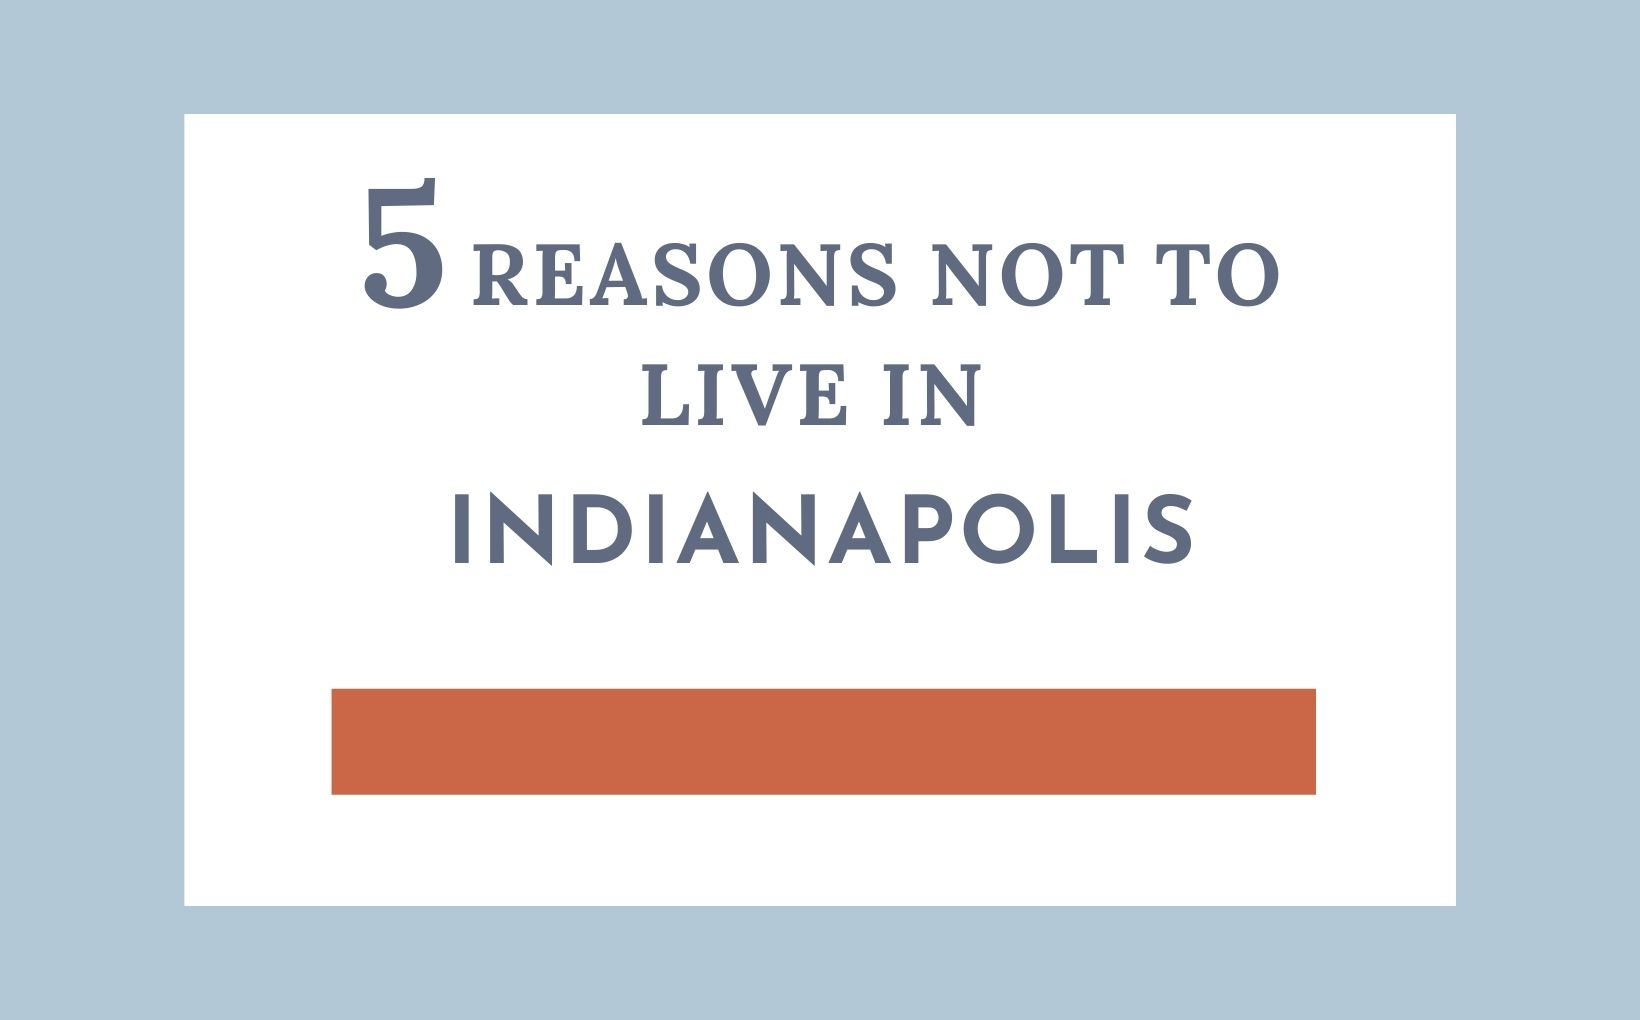 5 Reasons Not to live in Indianapolis feature image